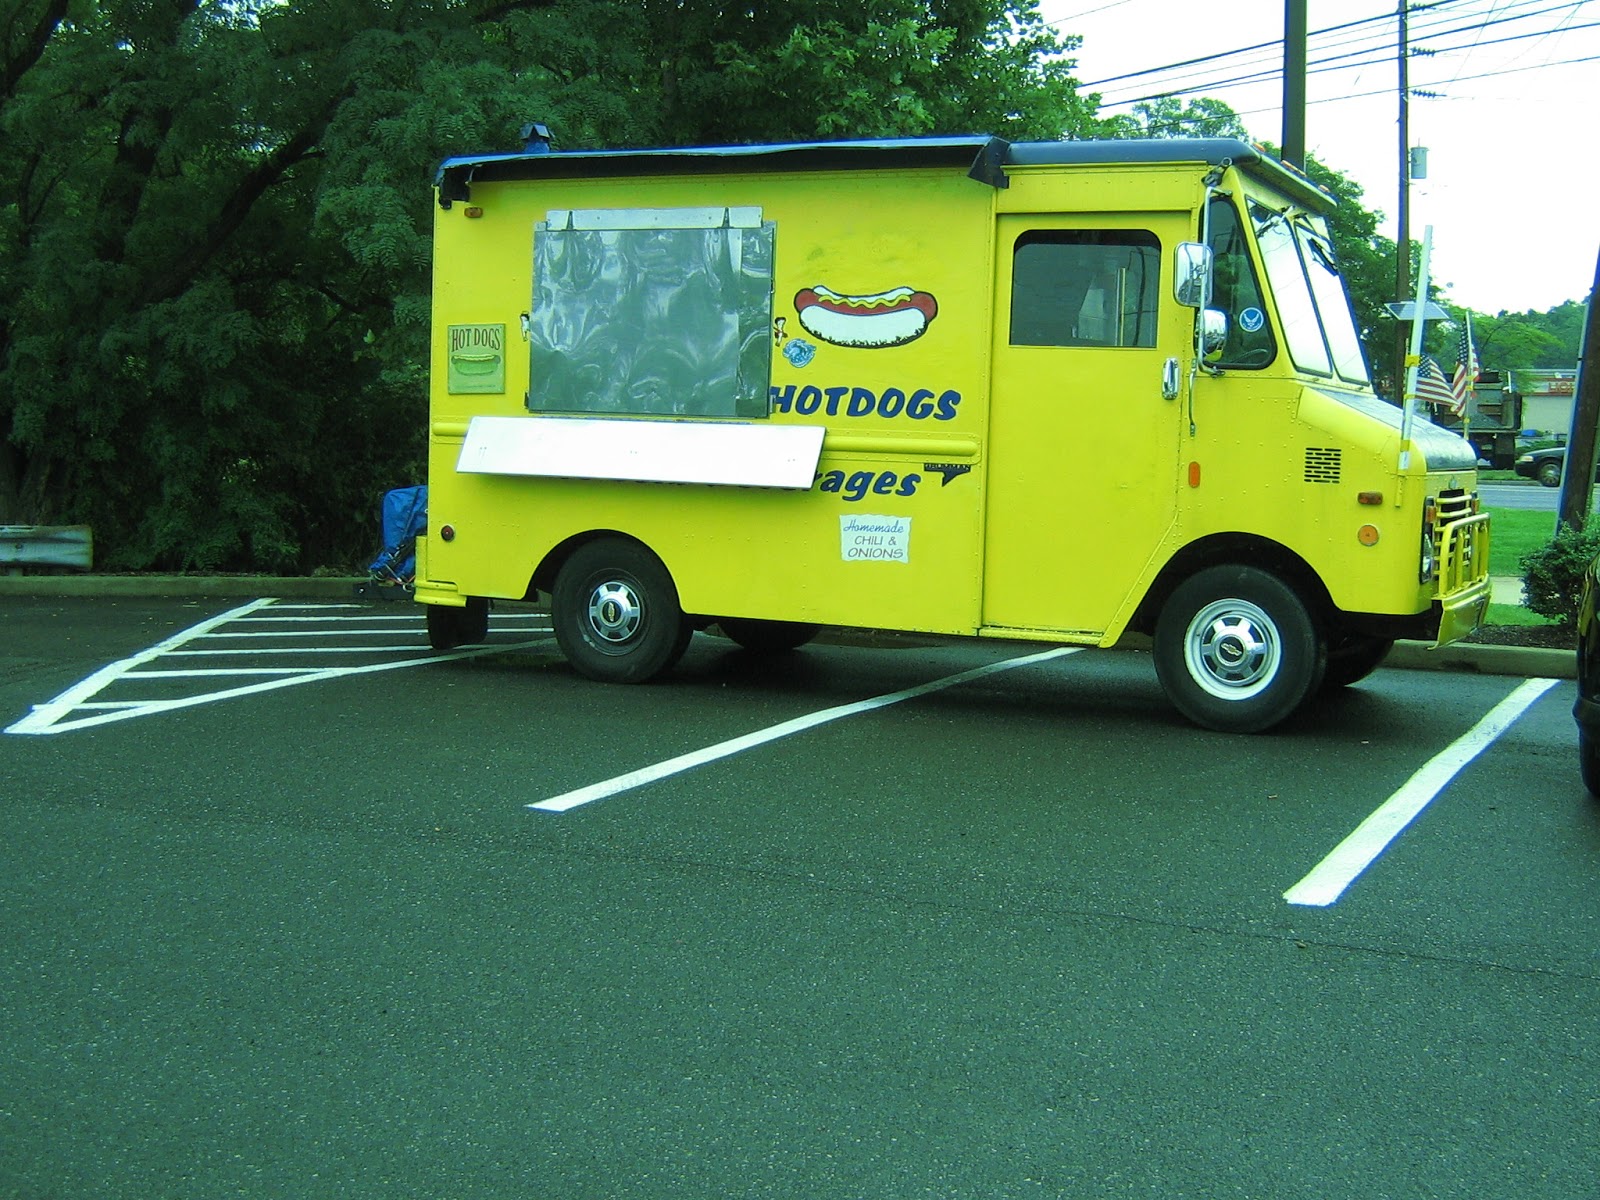 The Hot Dog Truck: Hot Dog Truck for Sale in Rahway, NJ